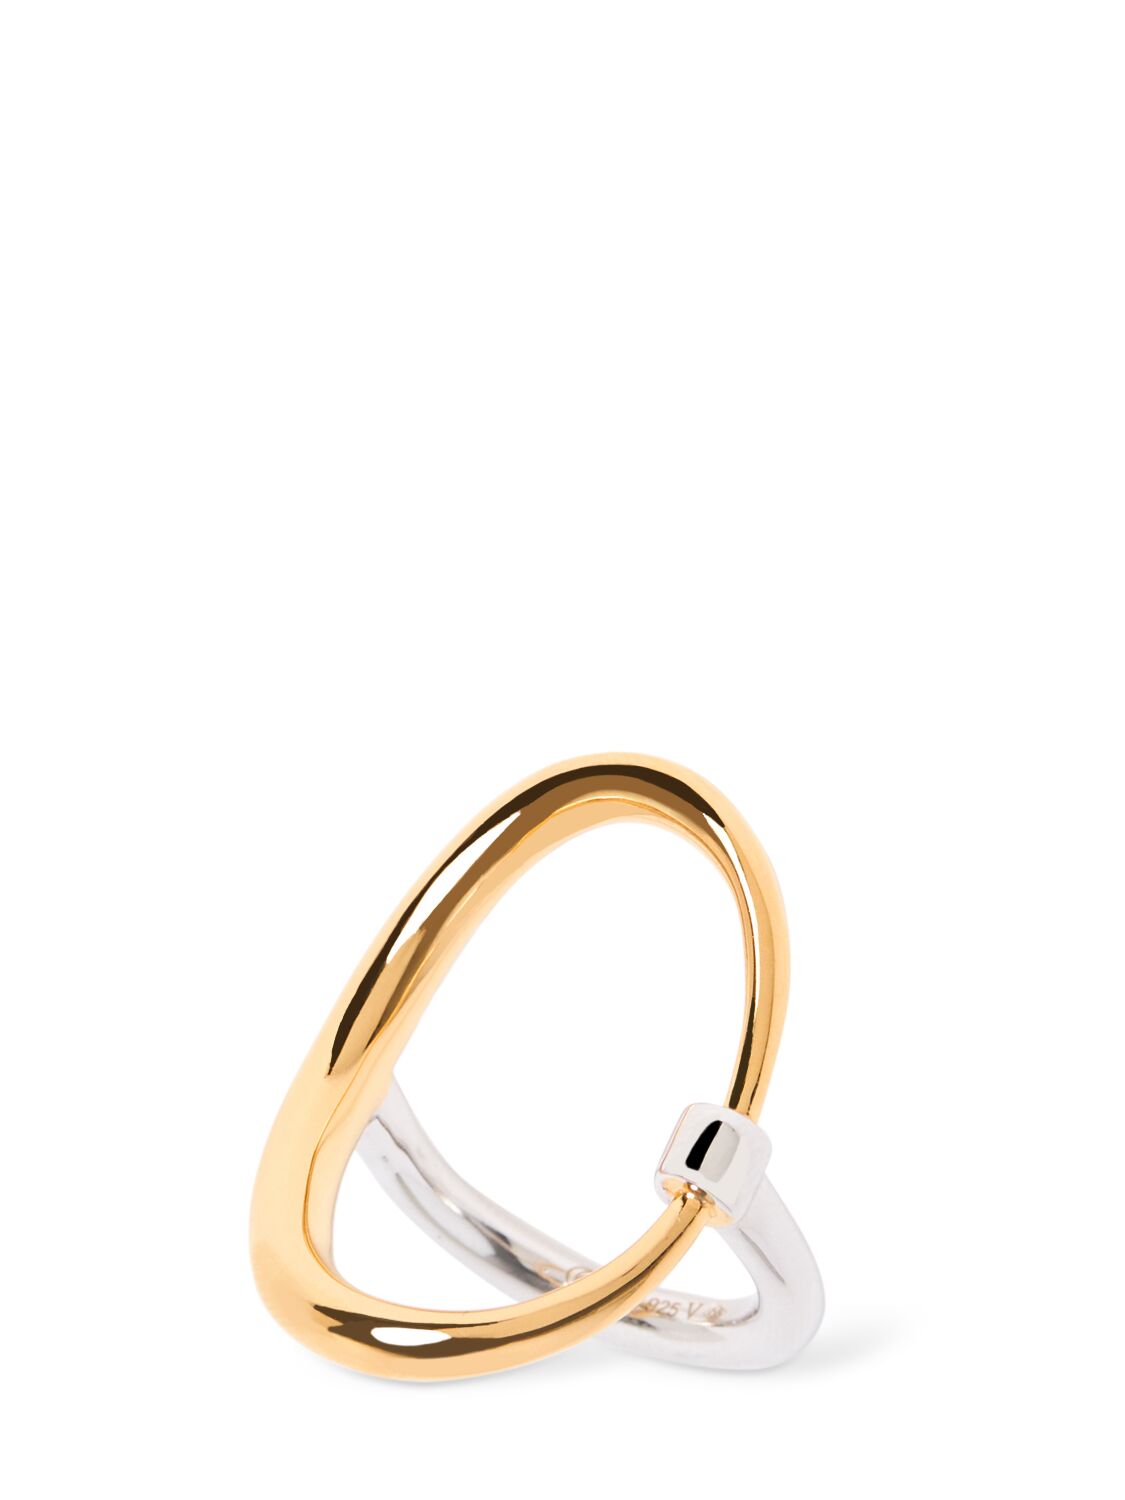 Charlotte Chesnais Bague Turtle Vermeil & Silver Ring In Gold